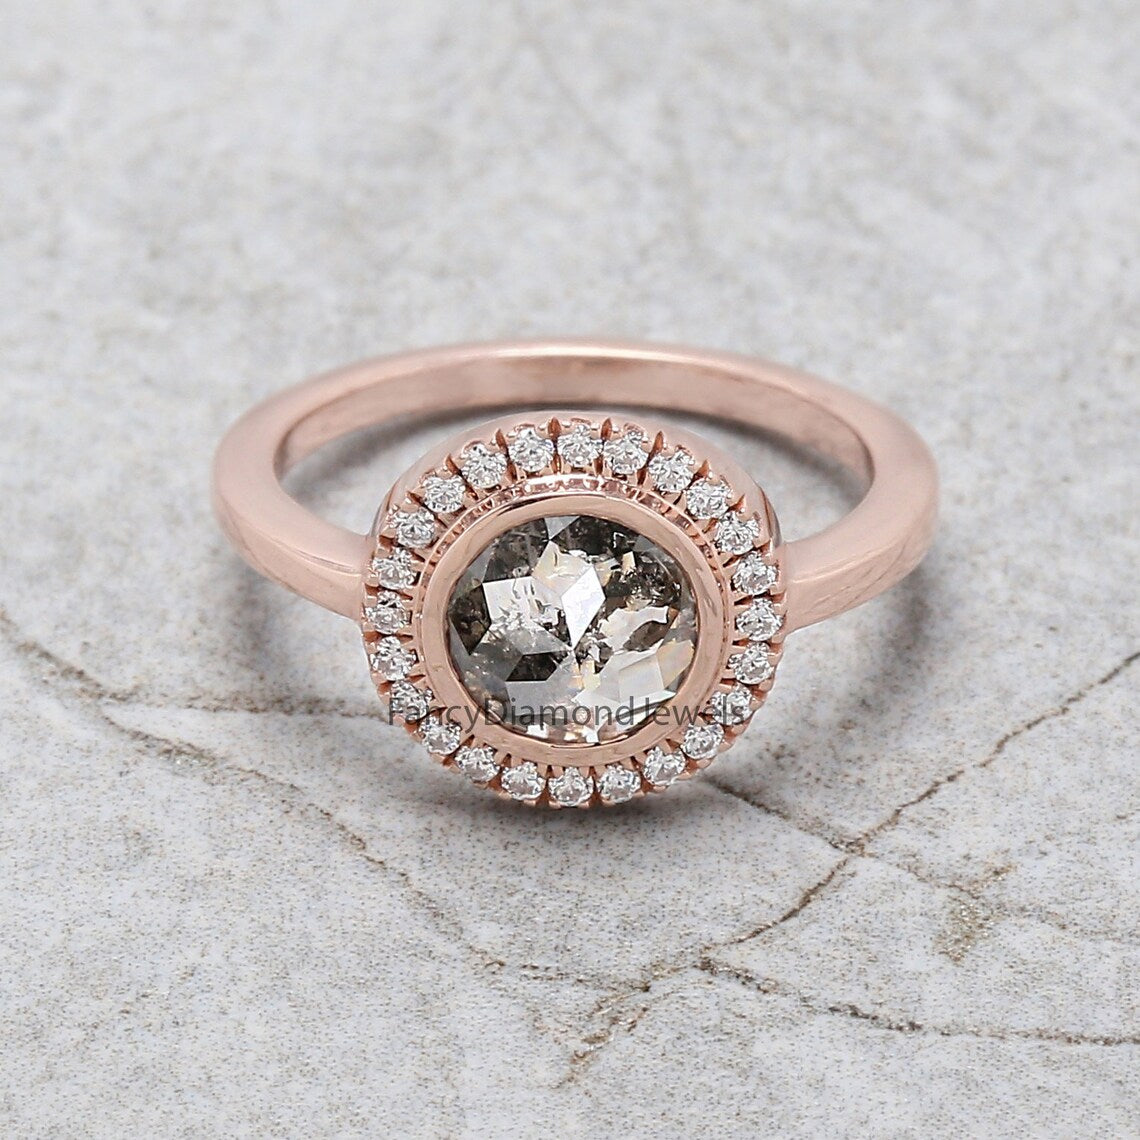 Round Rose Cut Salt And Pepper Diamond Ring 1.14 Ct 7.28 MM Round Diamond Ring 14K Rose Gold Silver Engagement Ring Gift For Her QL2590